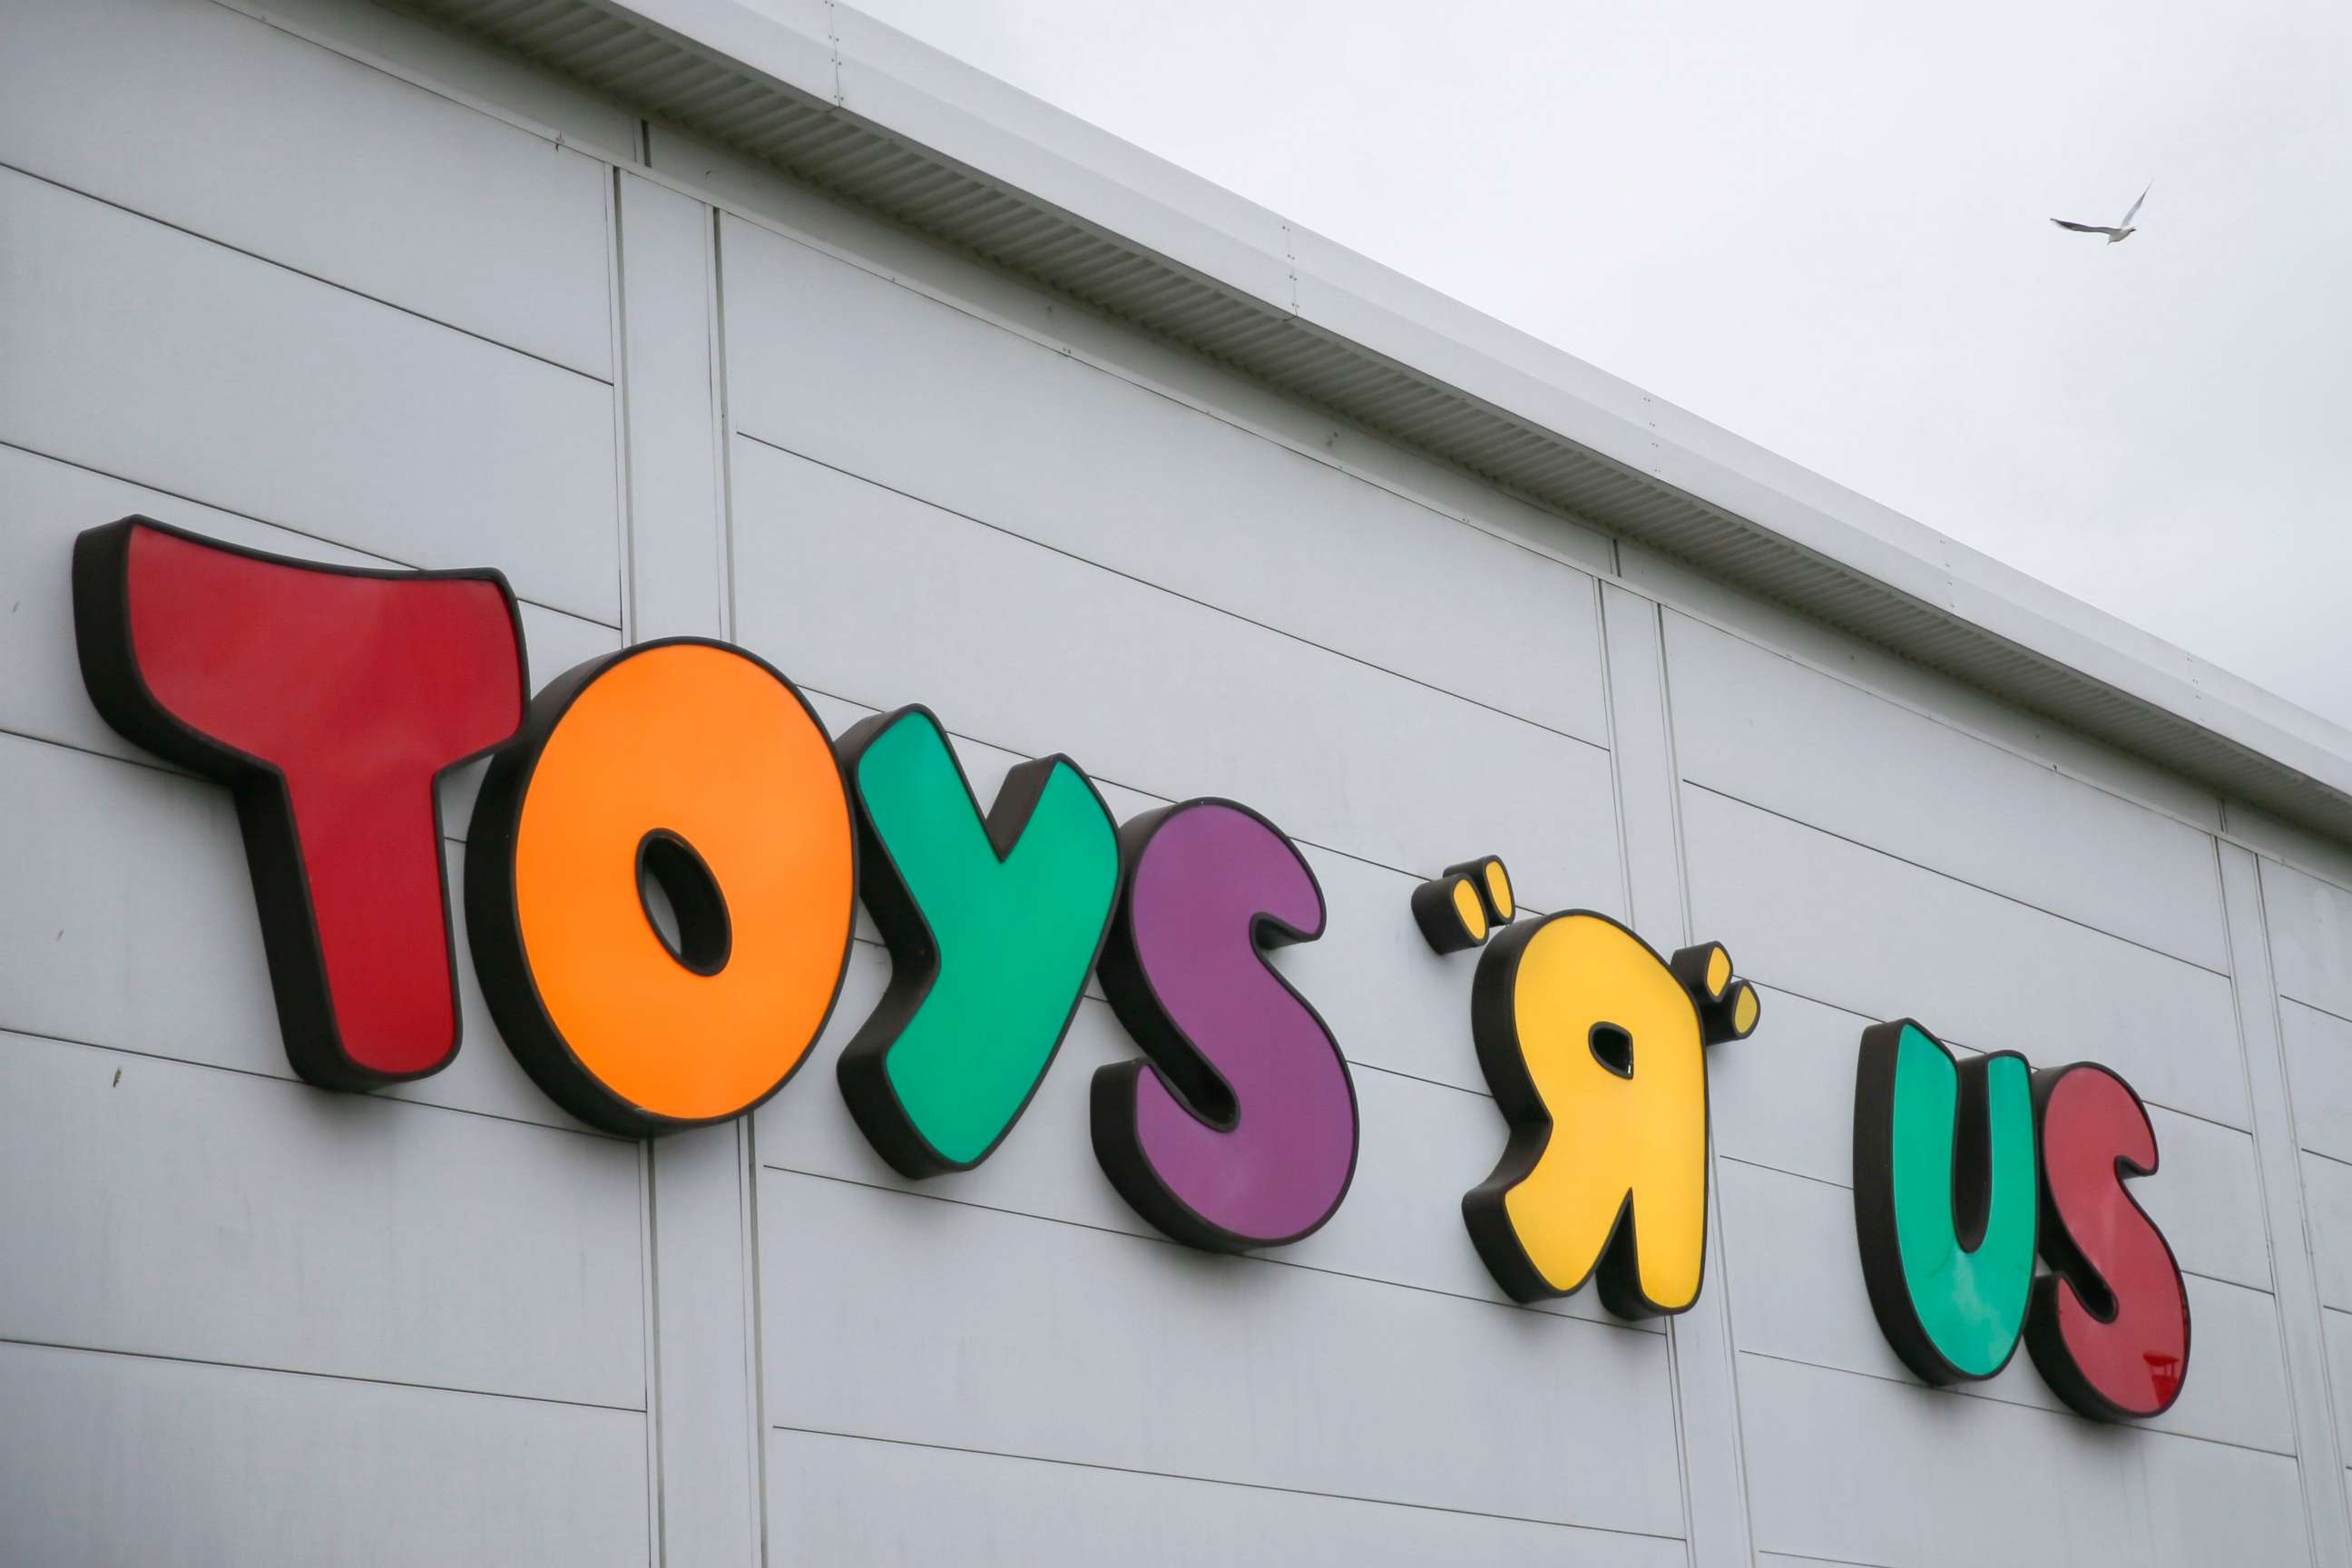 The Closing of Toys “R” Us: Due to Decline in Birthrates?